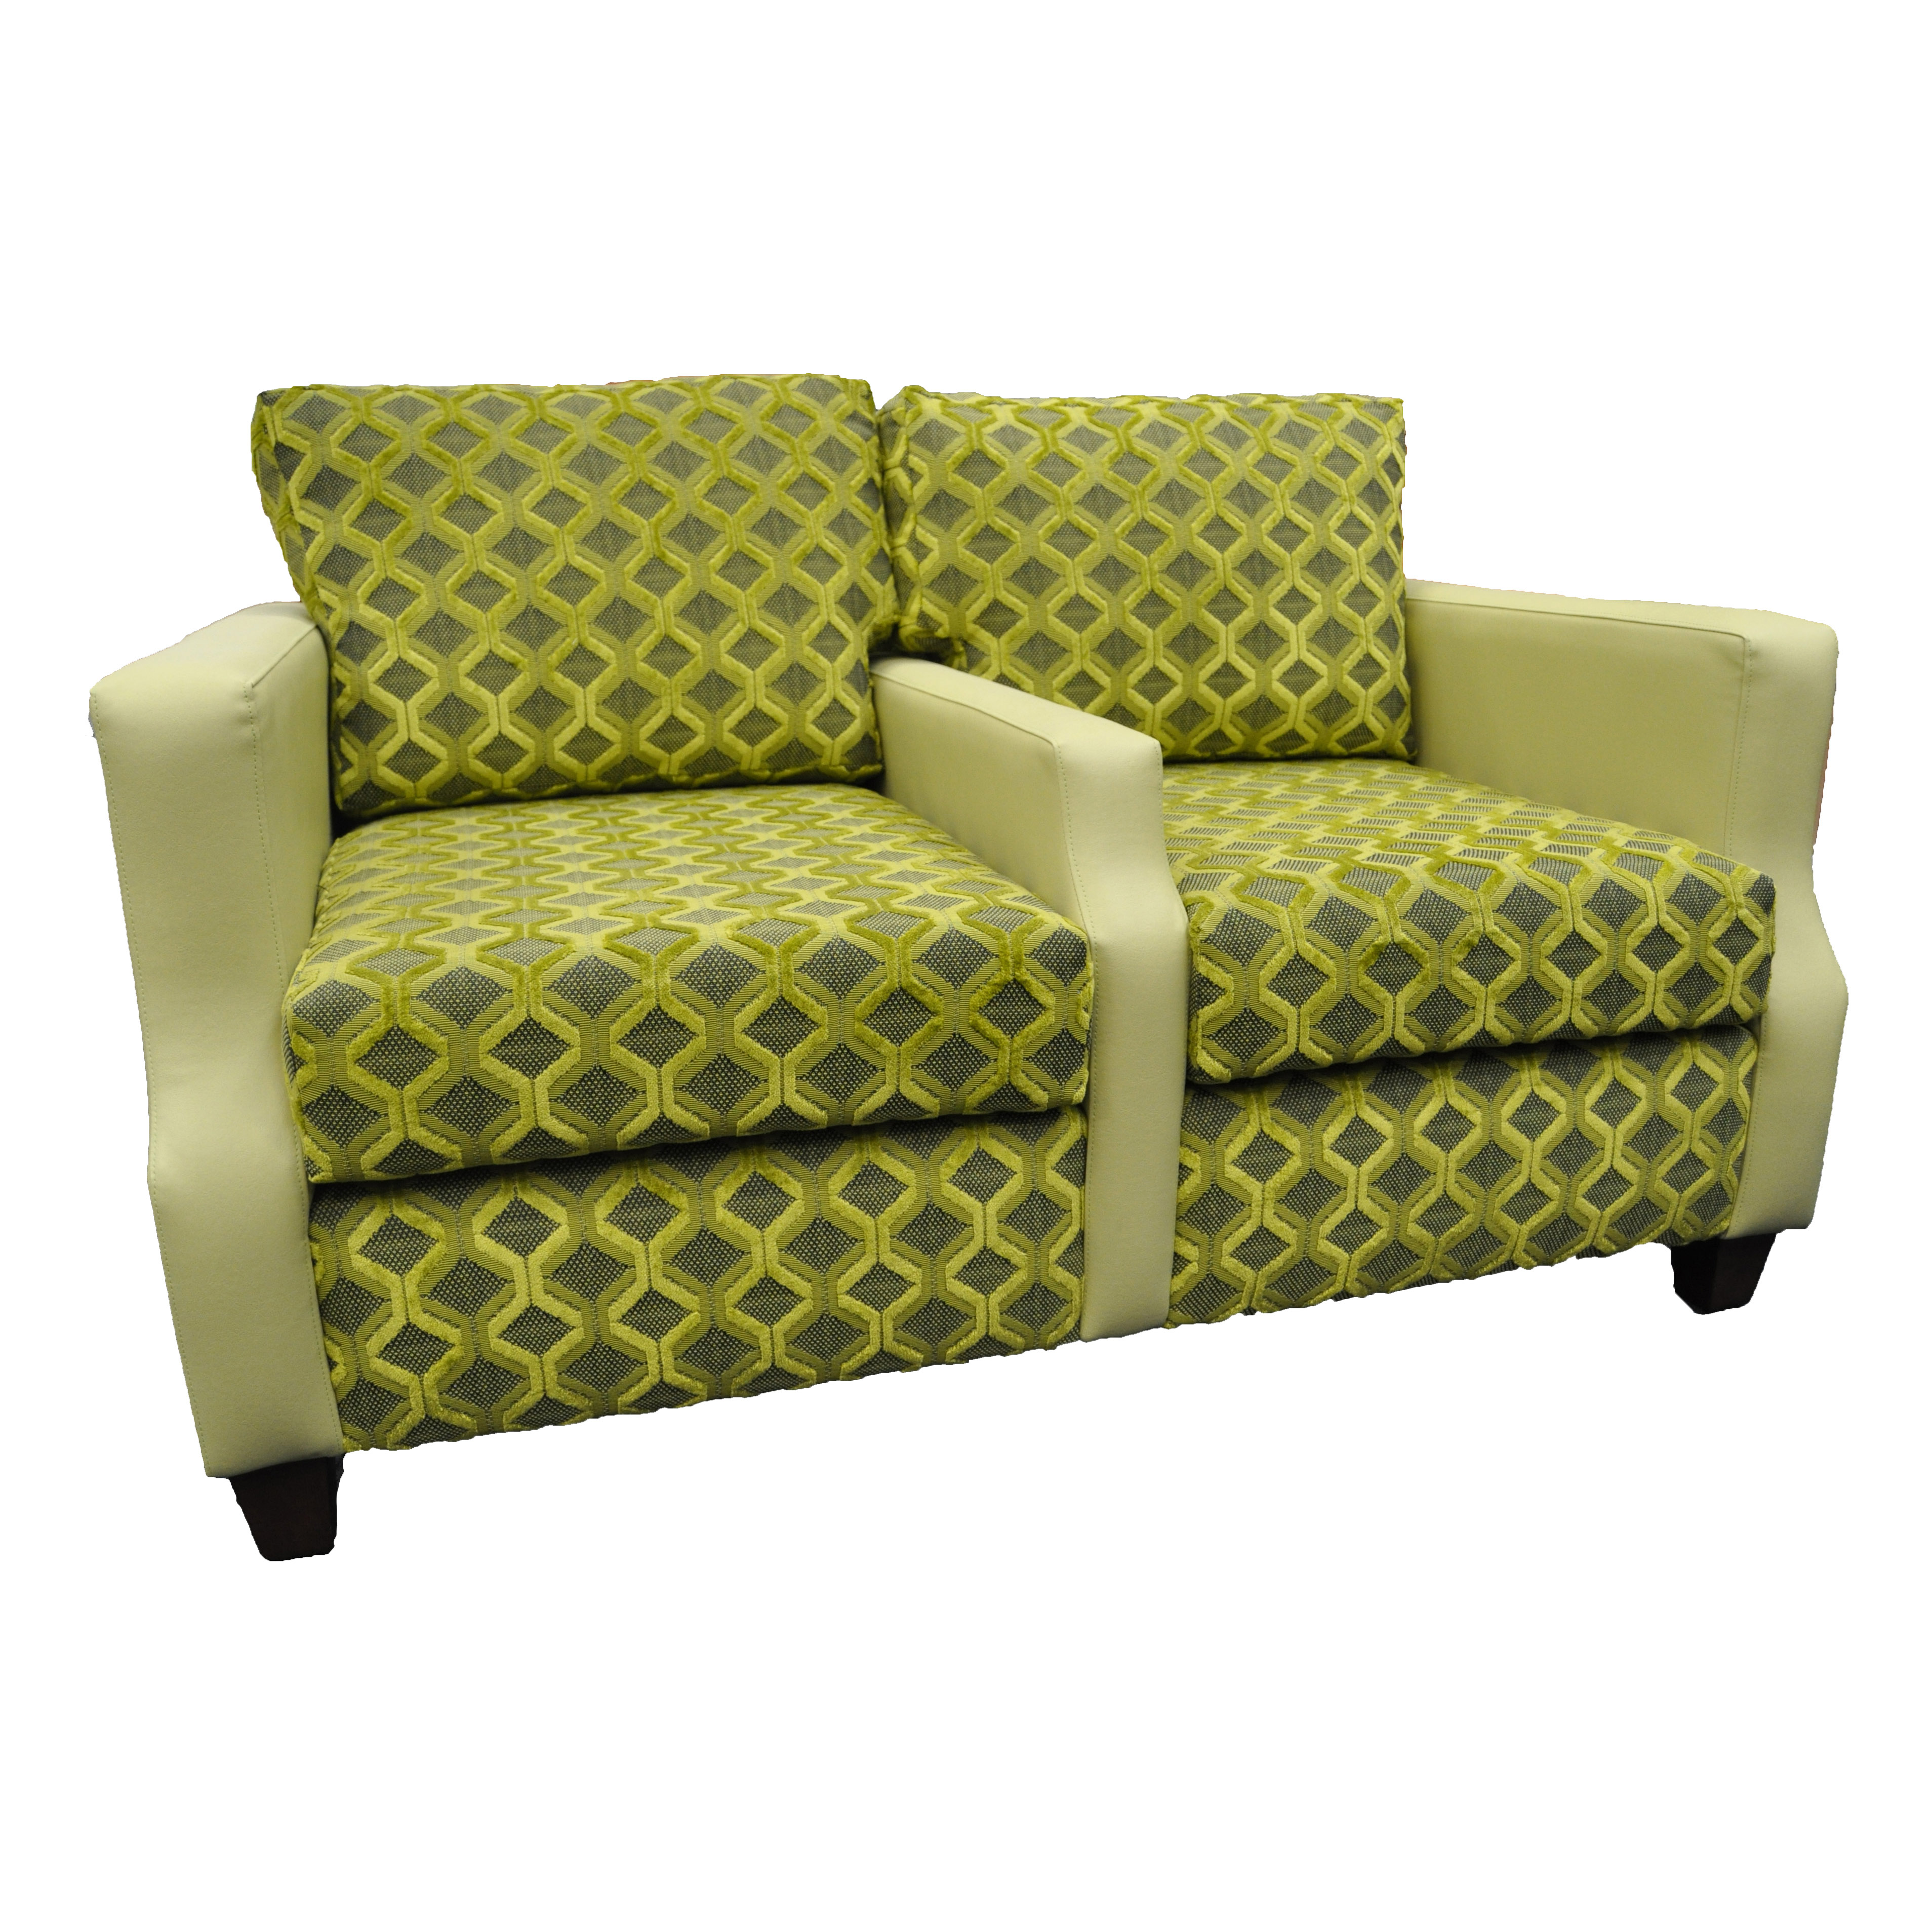 Florentina 2 Seater with Middle Arm